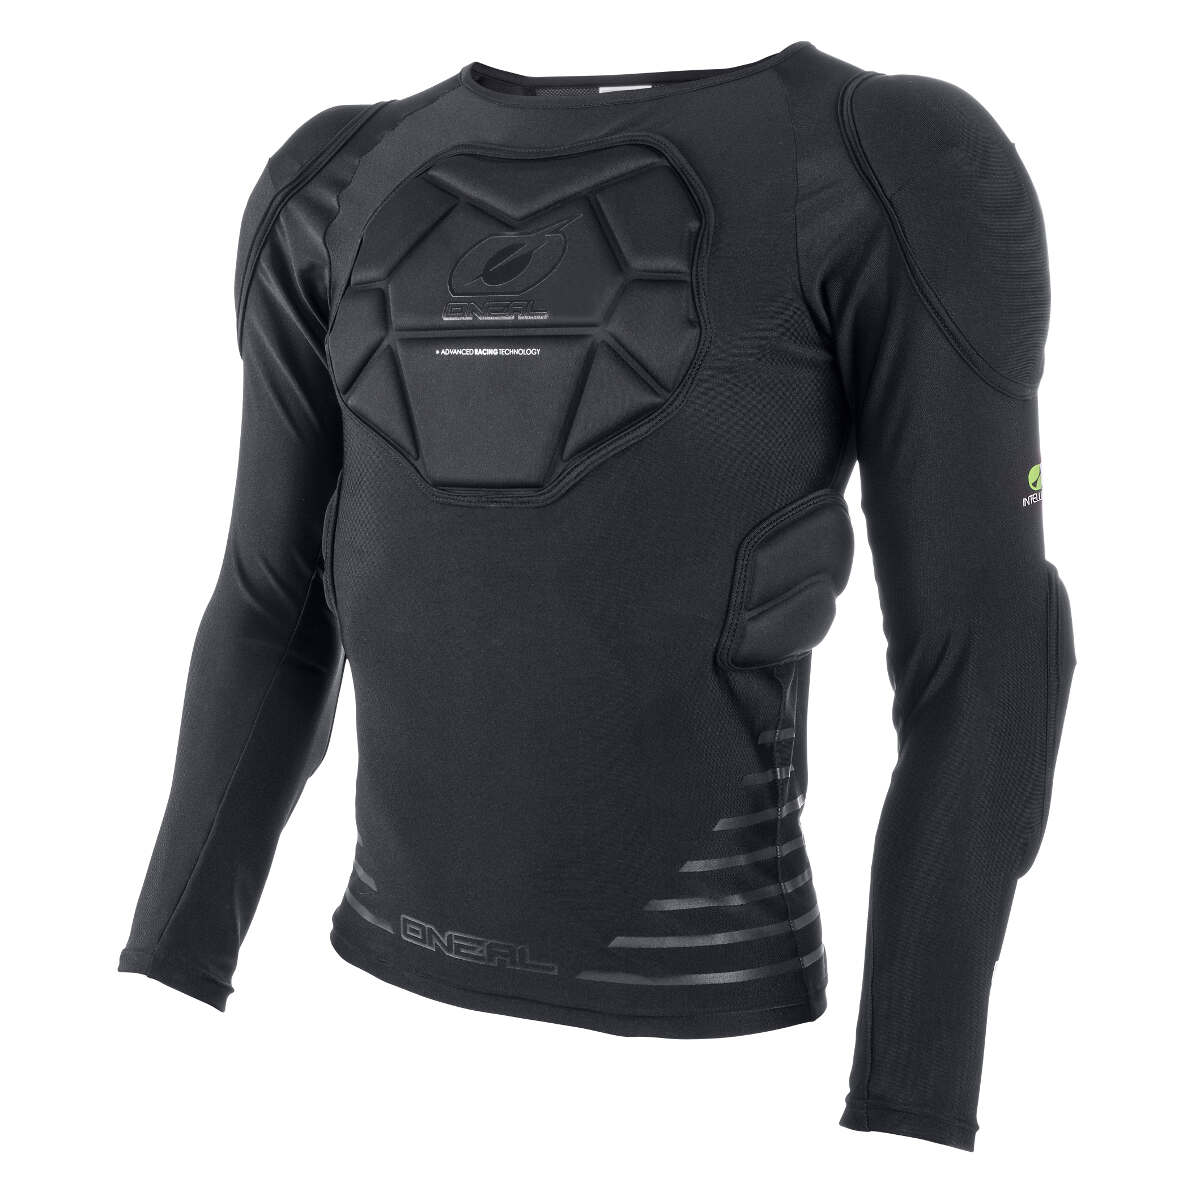 O'Neal Maillot de Protection Manches Lounges STV Black